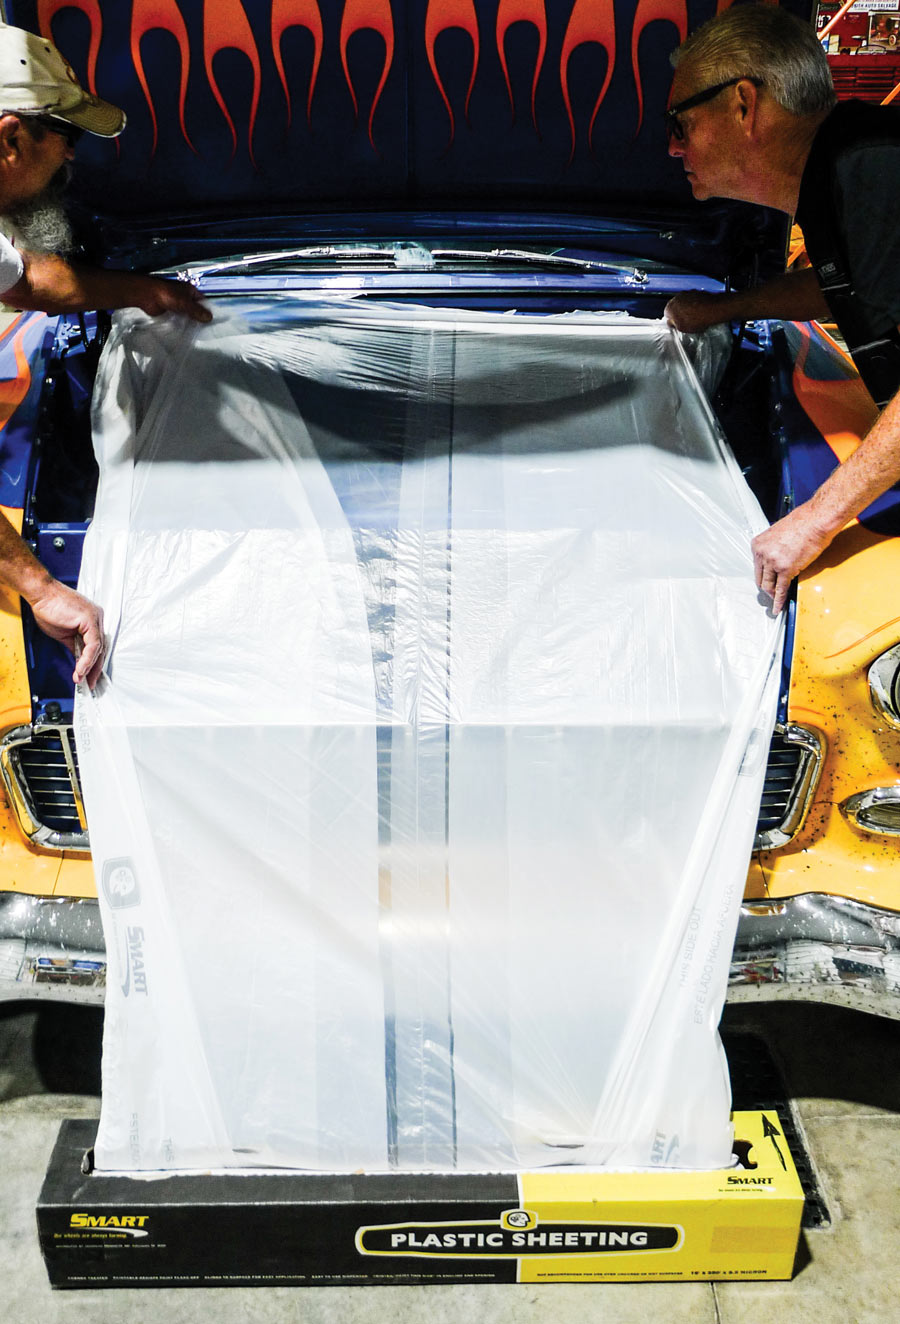 Since there’s no need to wet the engine down we’ll stretch out a section of static-cling plastic sheeting. 